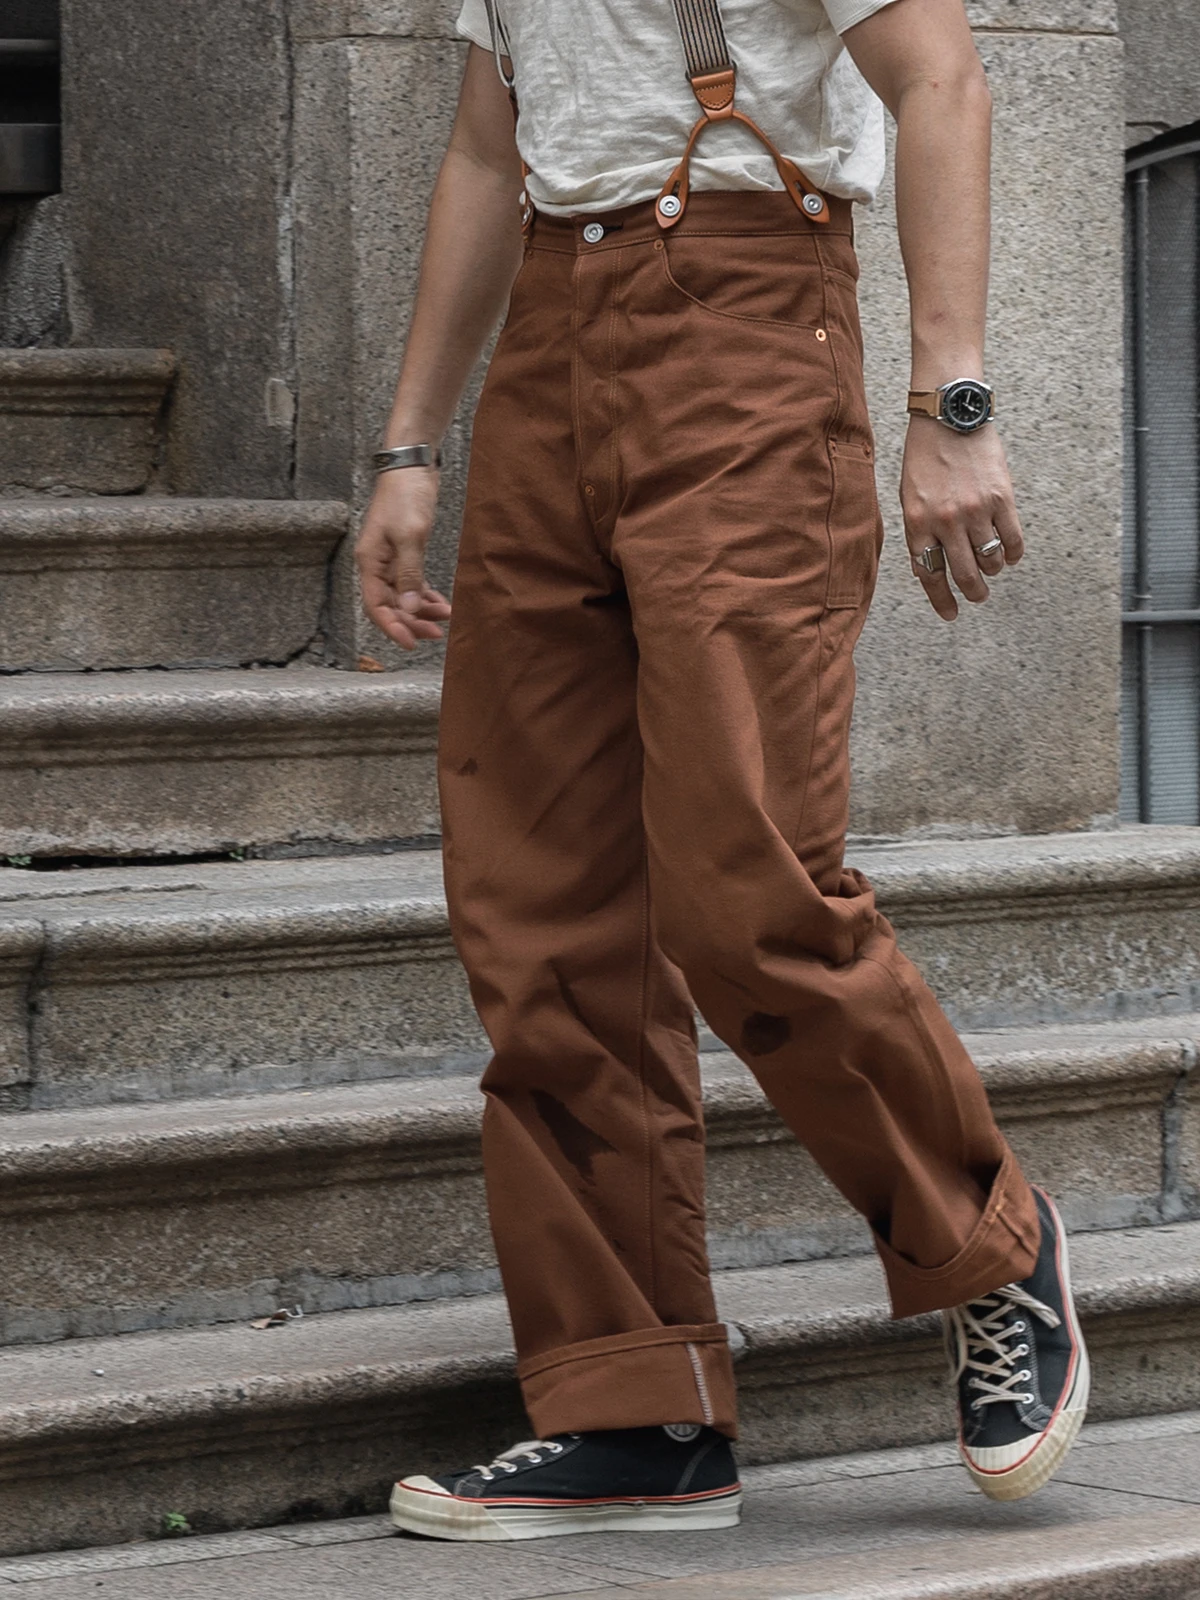 Bronson 1873 Duck Canvas Work Pants Gold Rush Vintage Workwear Trousers Brown